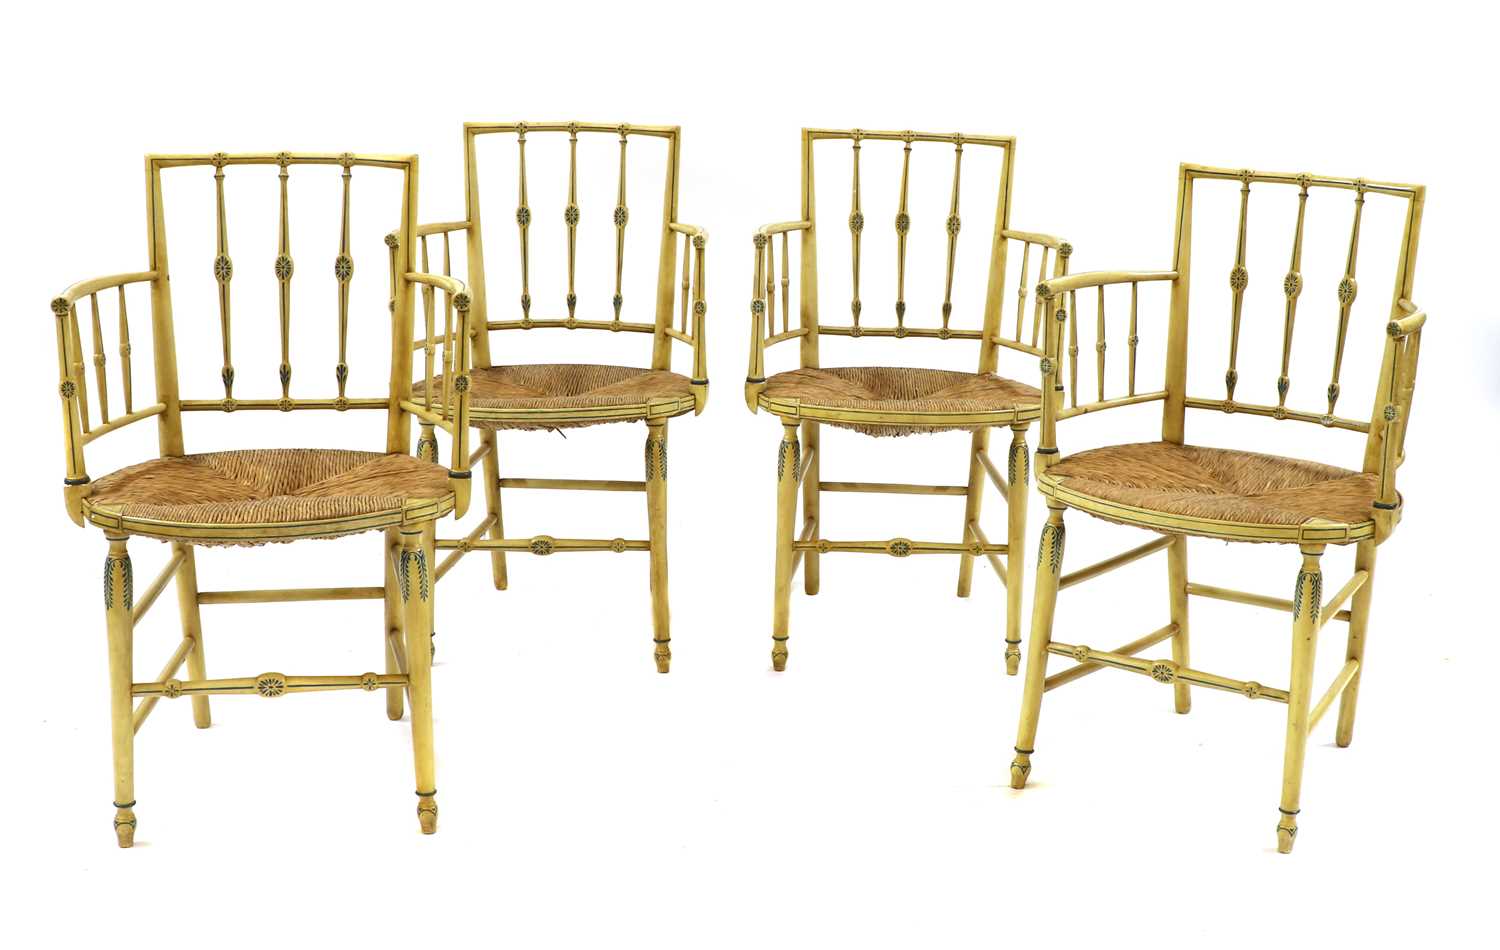 Lot 218 - A set of four painted Regency-style elbow chairs